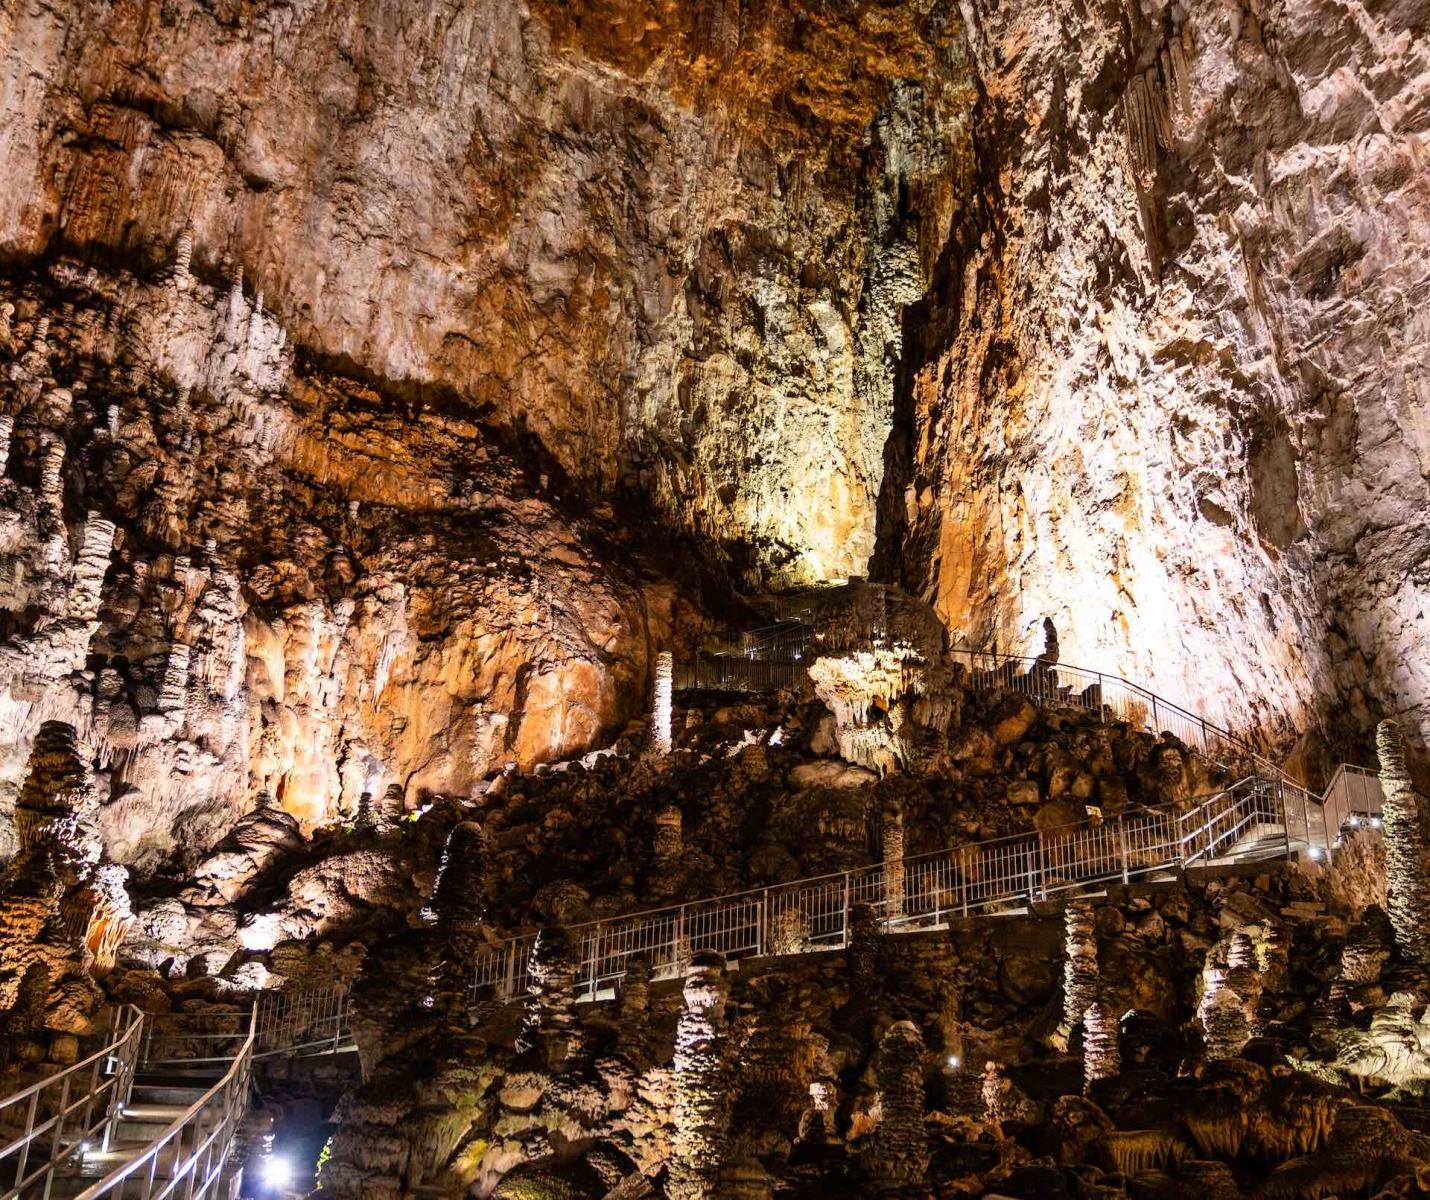 Grotta Gigante in Italy, one of the world's largest show caves